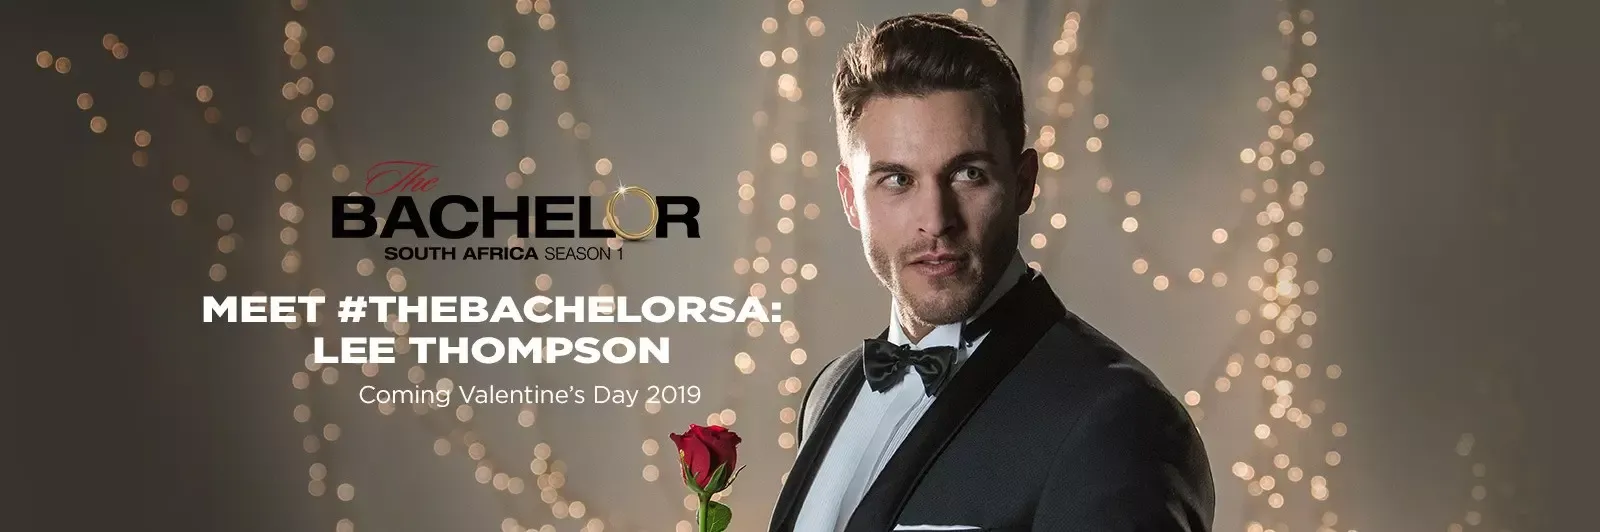 Love - Bachelor South Africa - Lee Thompson - Season 1 - Media SM - *Sleuthing Spoilers* 1538985735-27_The_Bachelor_Article_